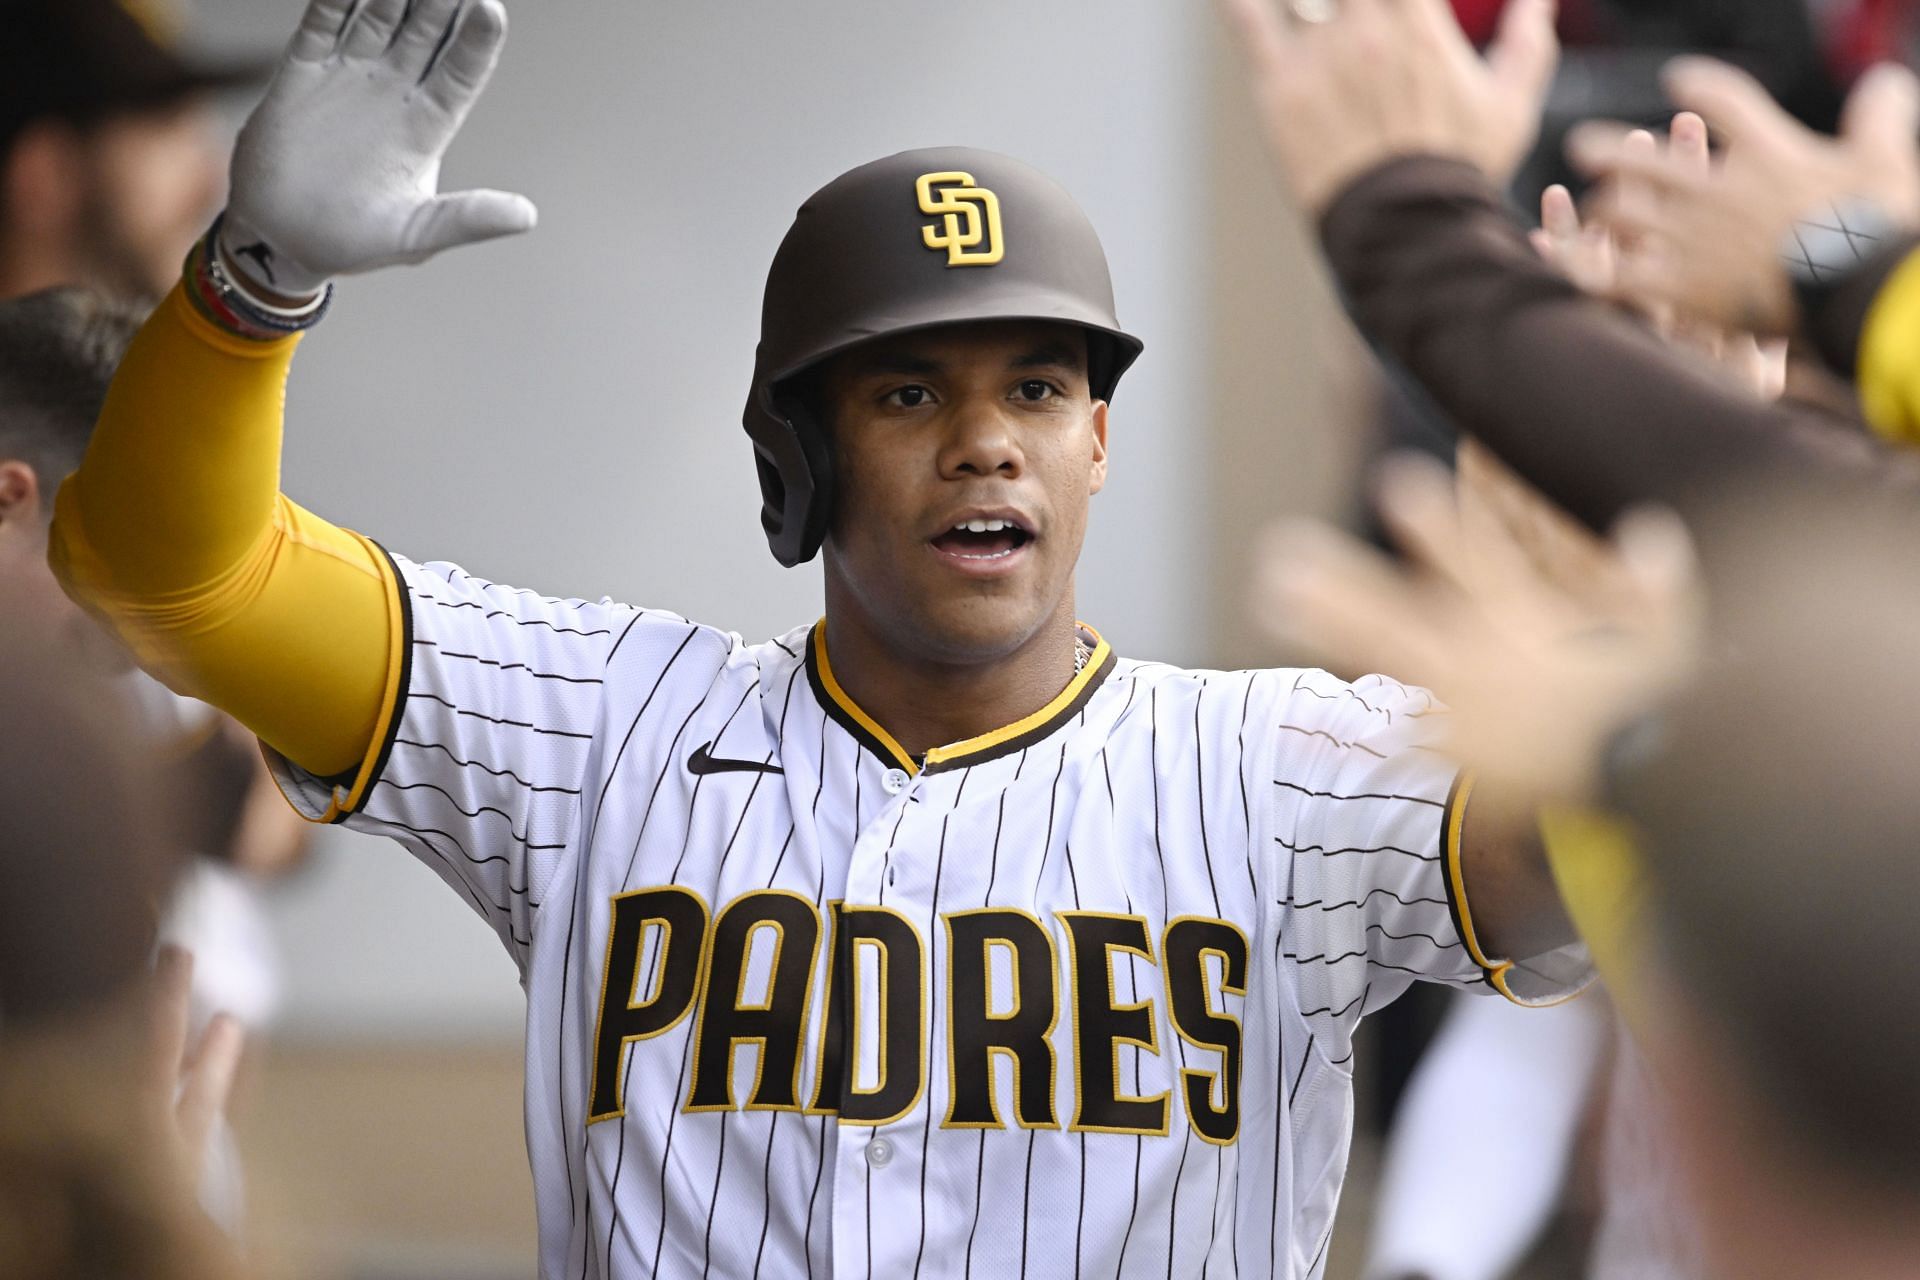 Juan Soto celebrating in his first game with the Padres